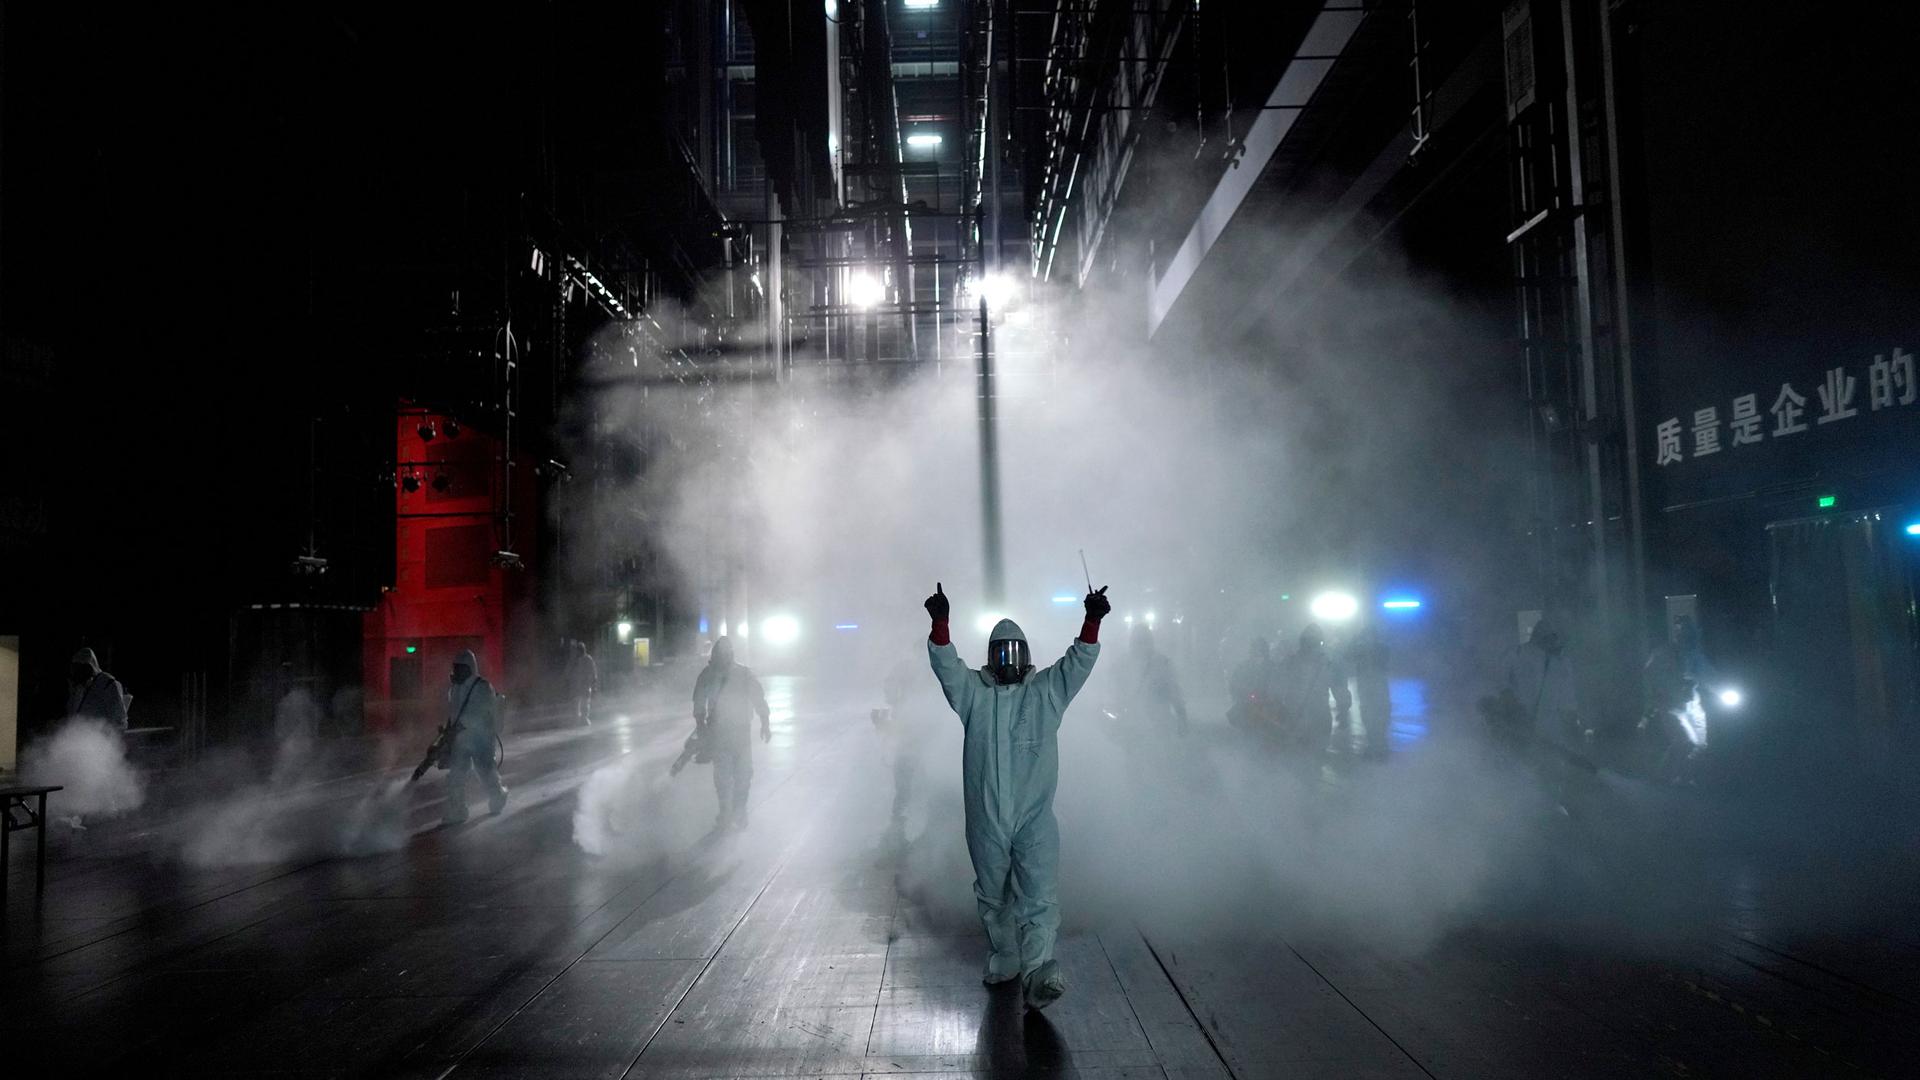 Several people are shown wearing protective clothing and spraying disinfectant in an open area in the dark of the evening.